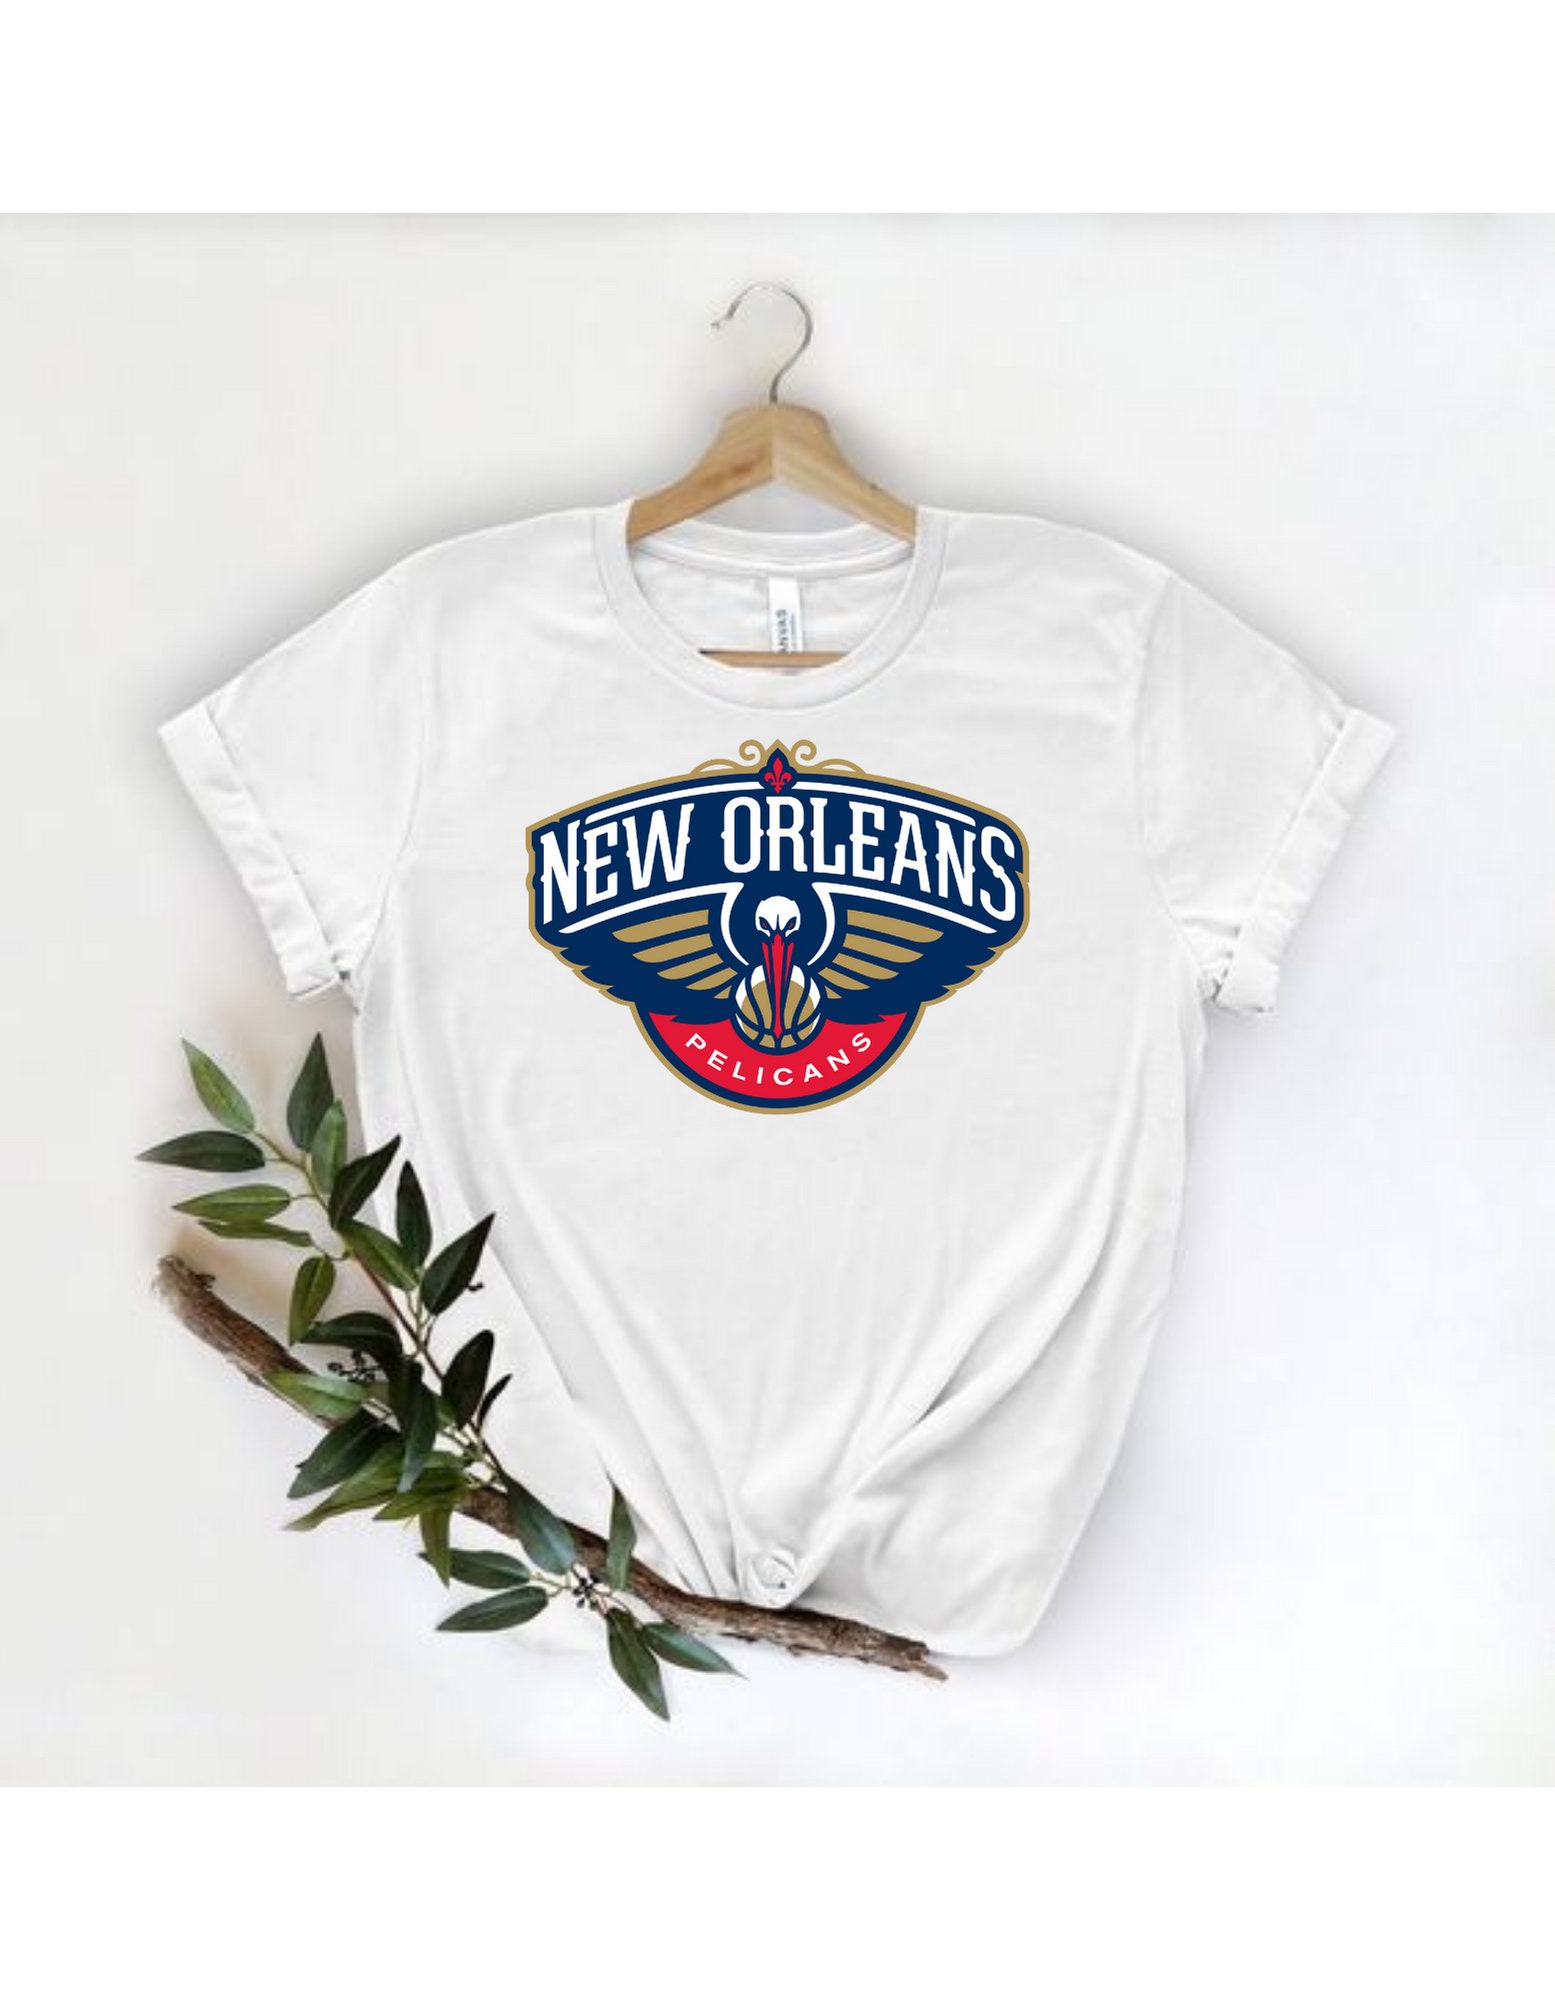 New Orleans Pelicans Basketball Jersey – ASAP Vintage Clothing